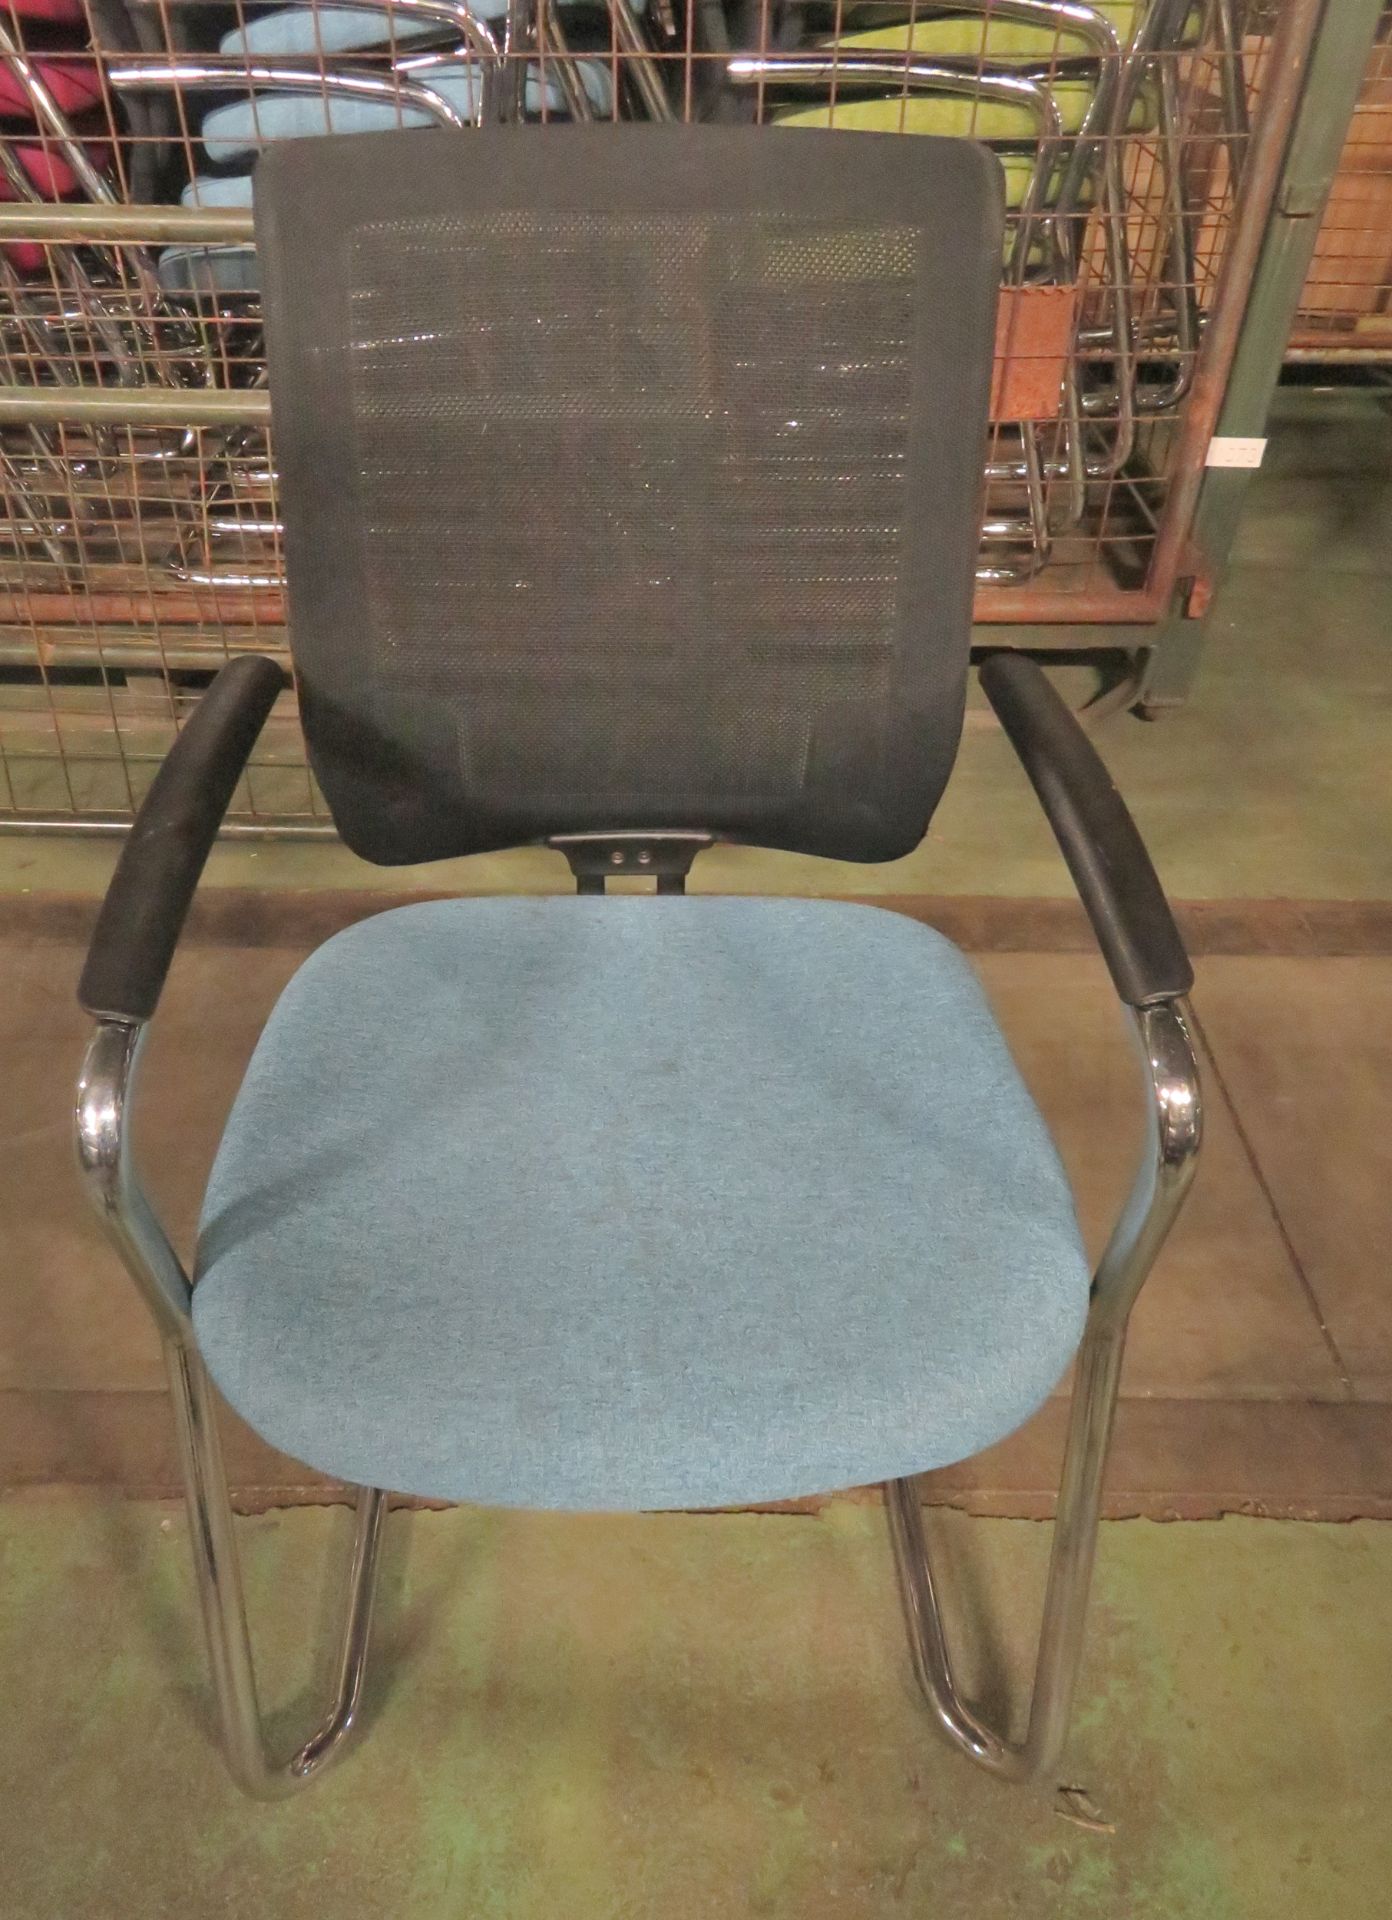 15x Blue Fabric Office Chair With Black Mesh Back, 5x Red Fabric Office Chair With Black M - Image 5 of 7